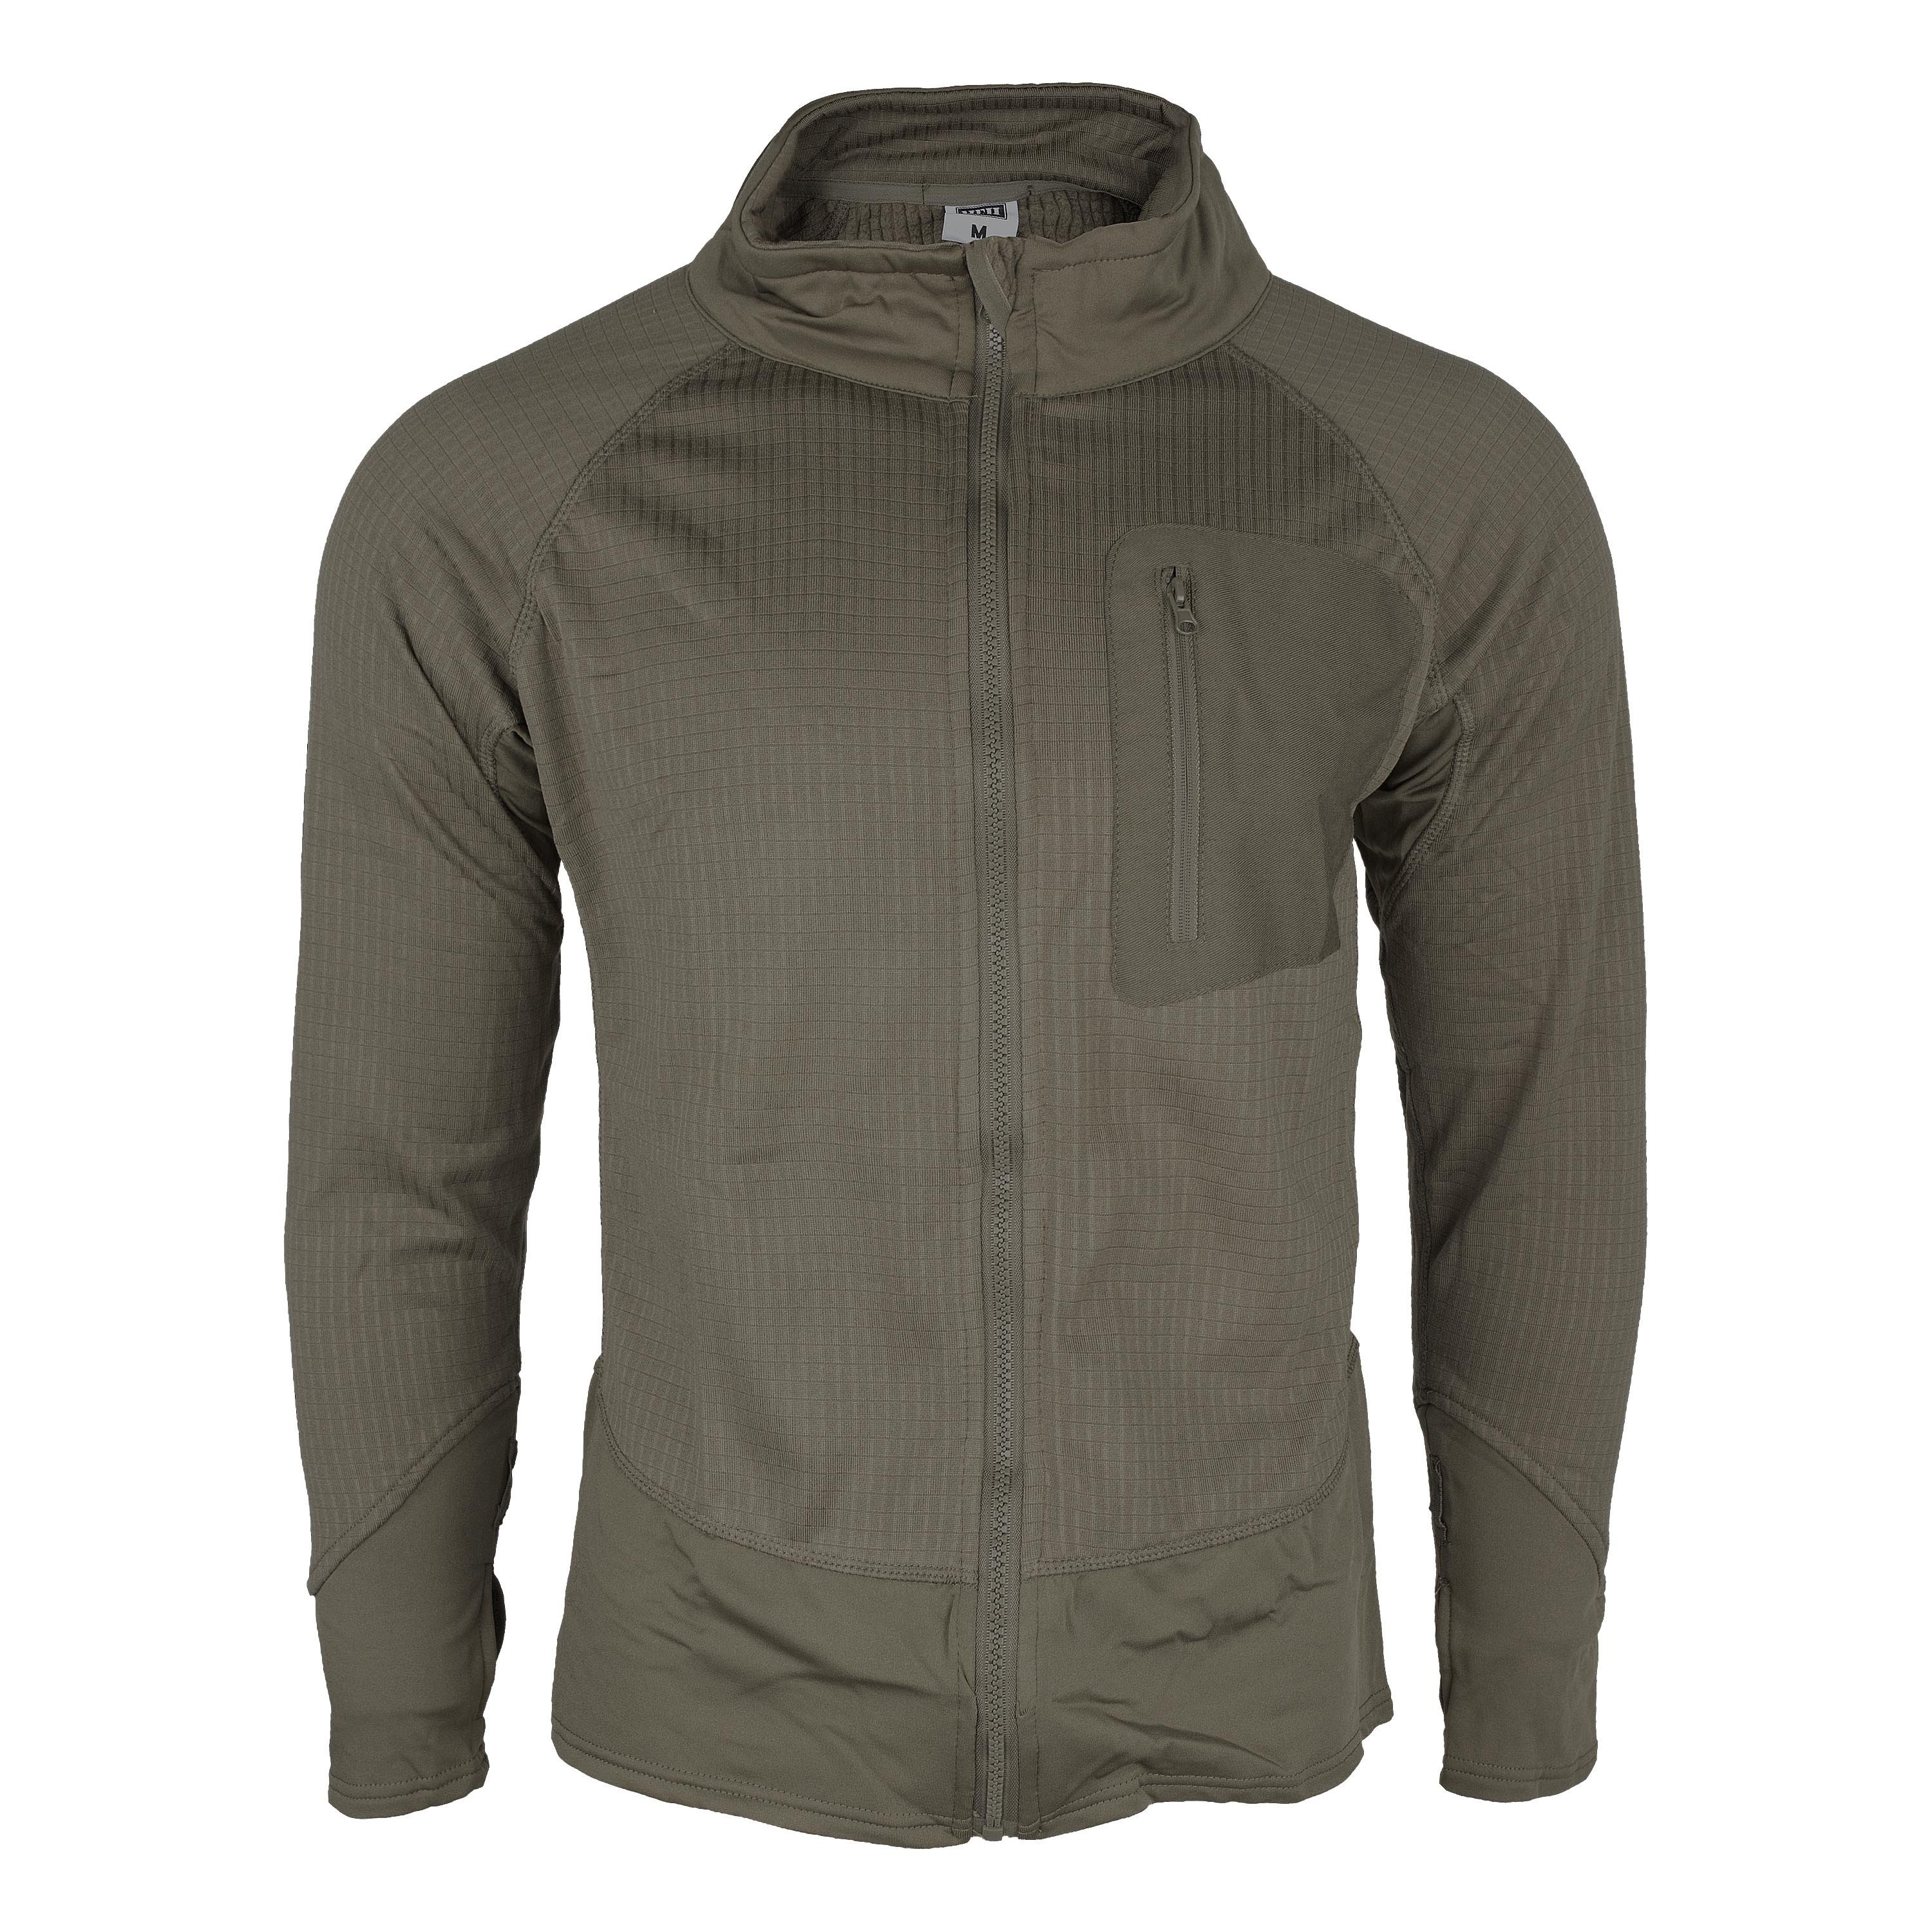 Purchase the MFH U.S. Midlayer Jacket Tactical olive by ASMC